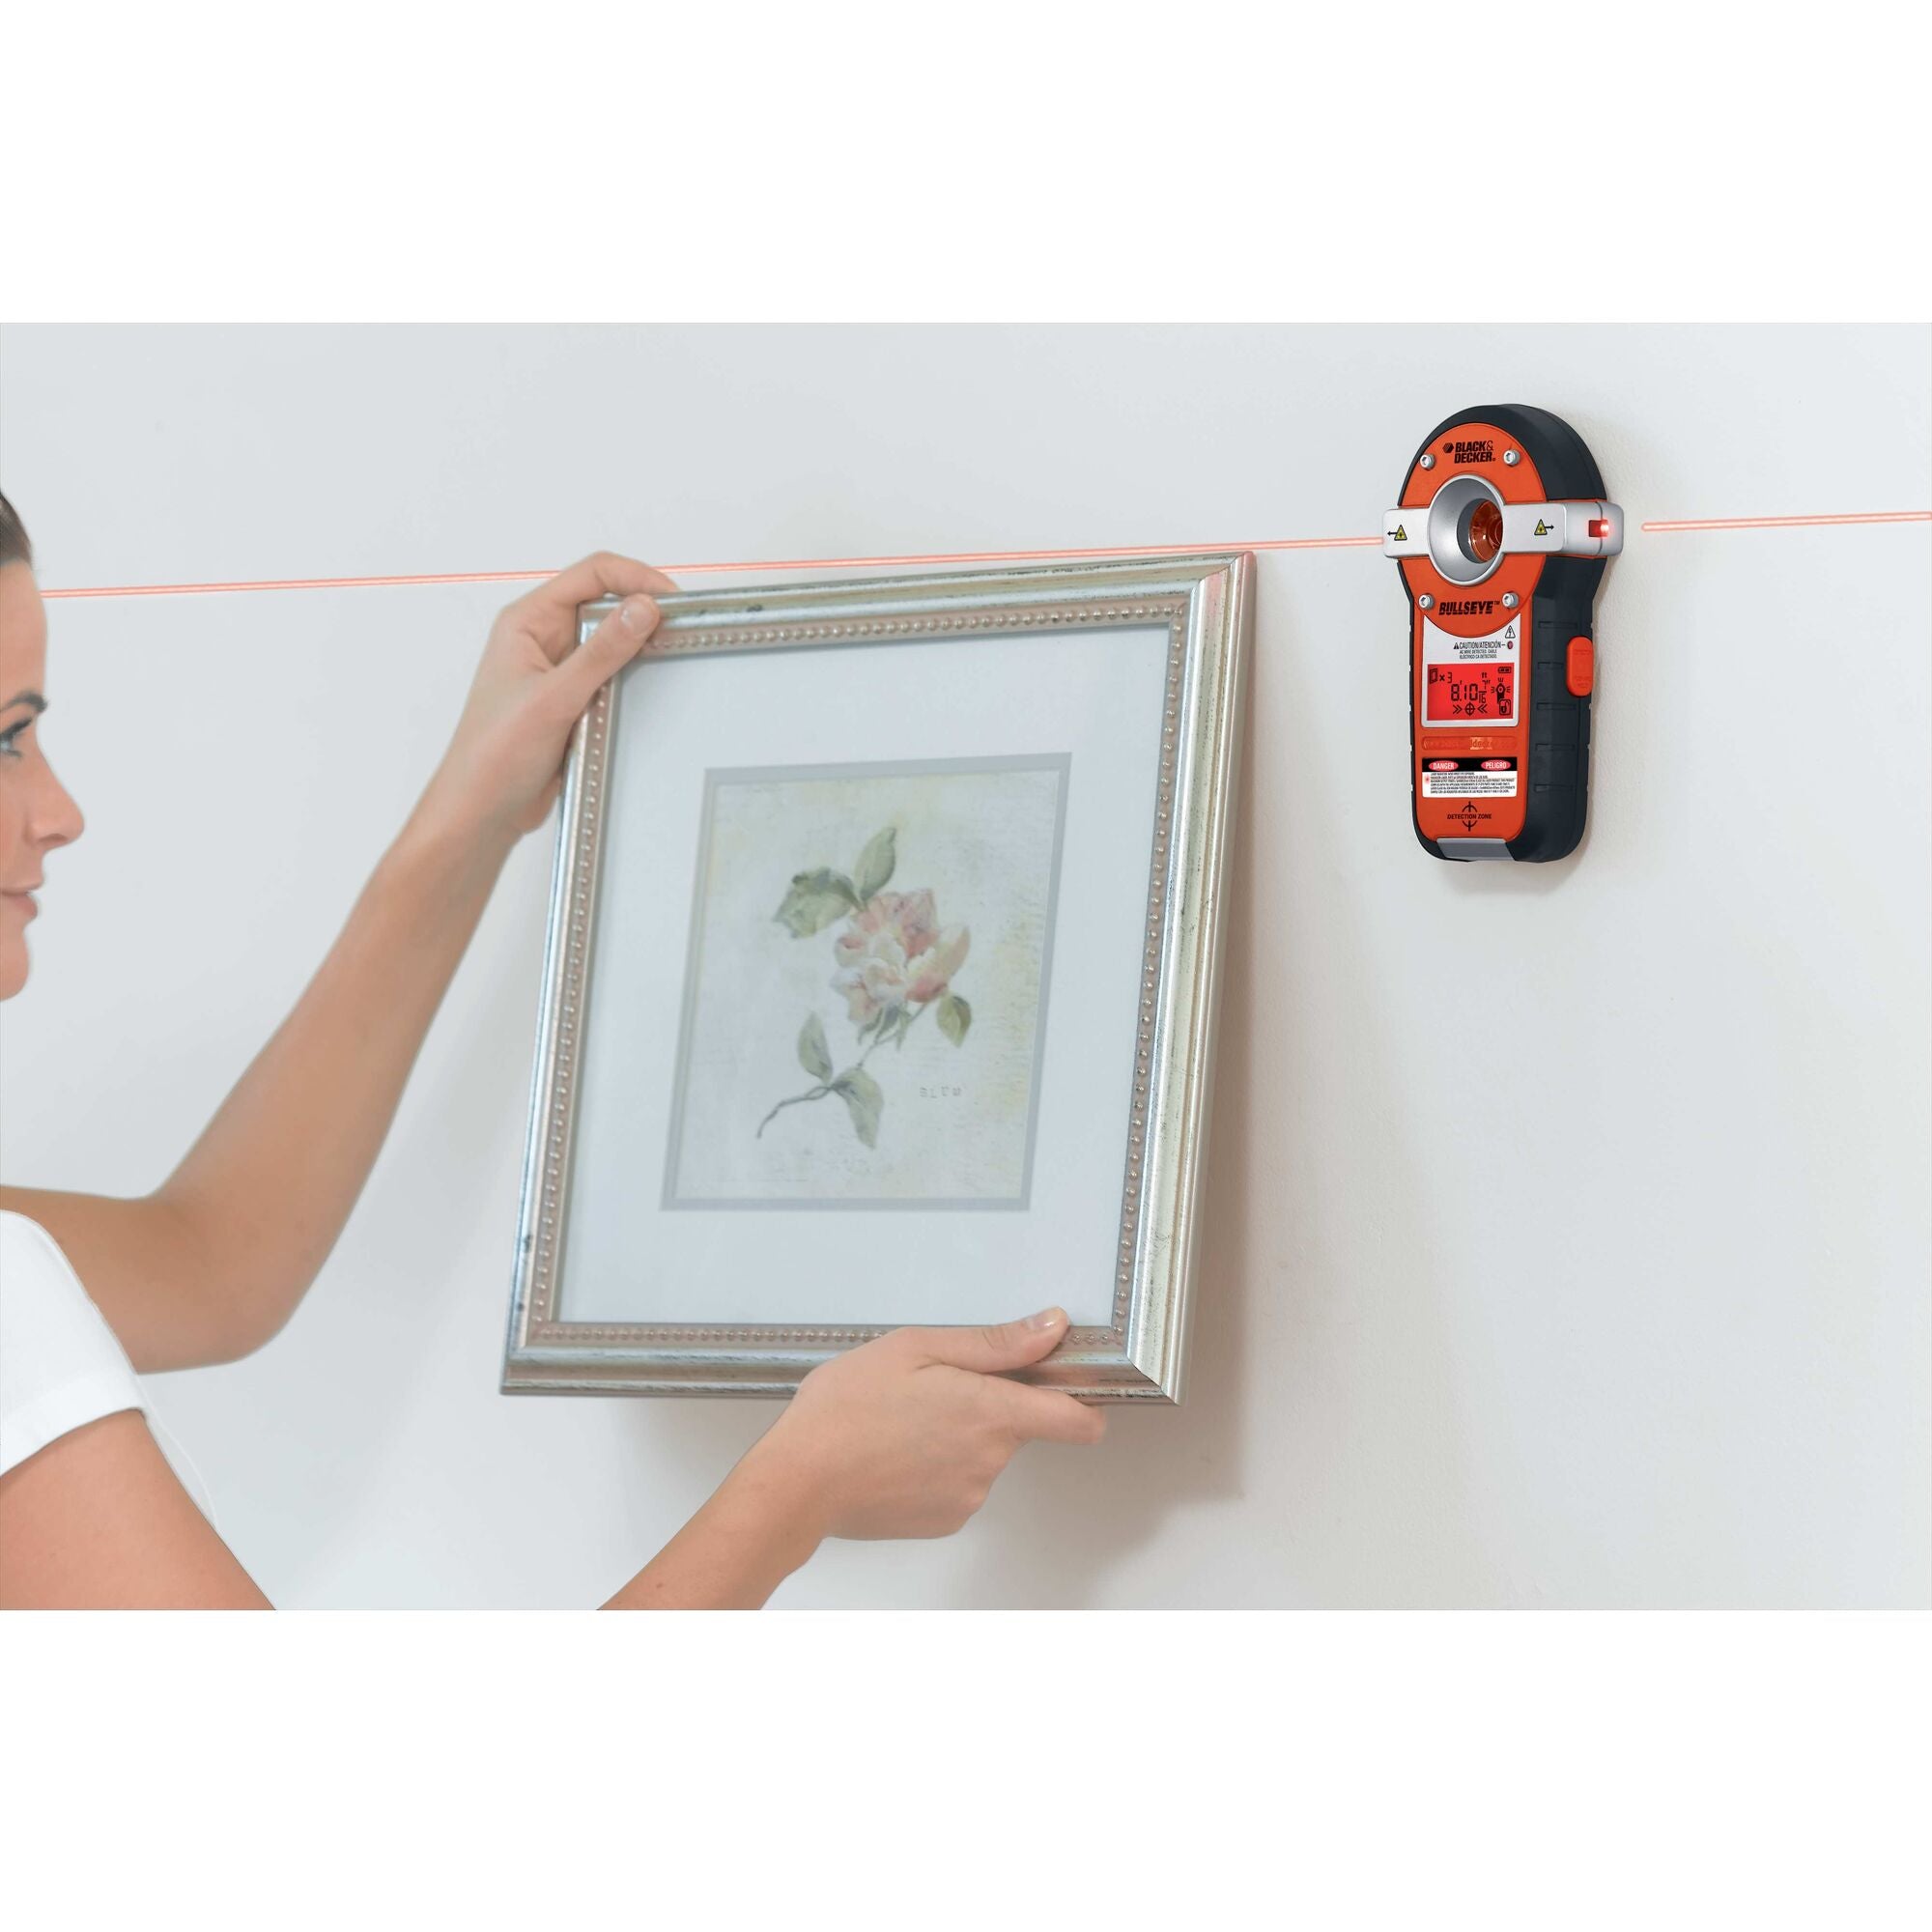 Bulls Eye Auto Leveling Laser with Stud Sensor being used for hanging mirror on wall.